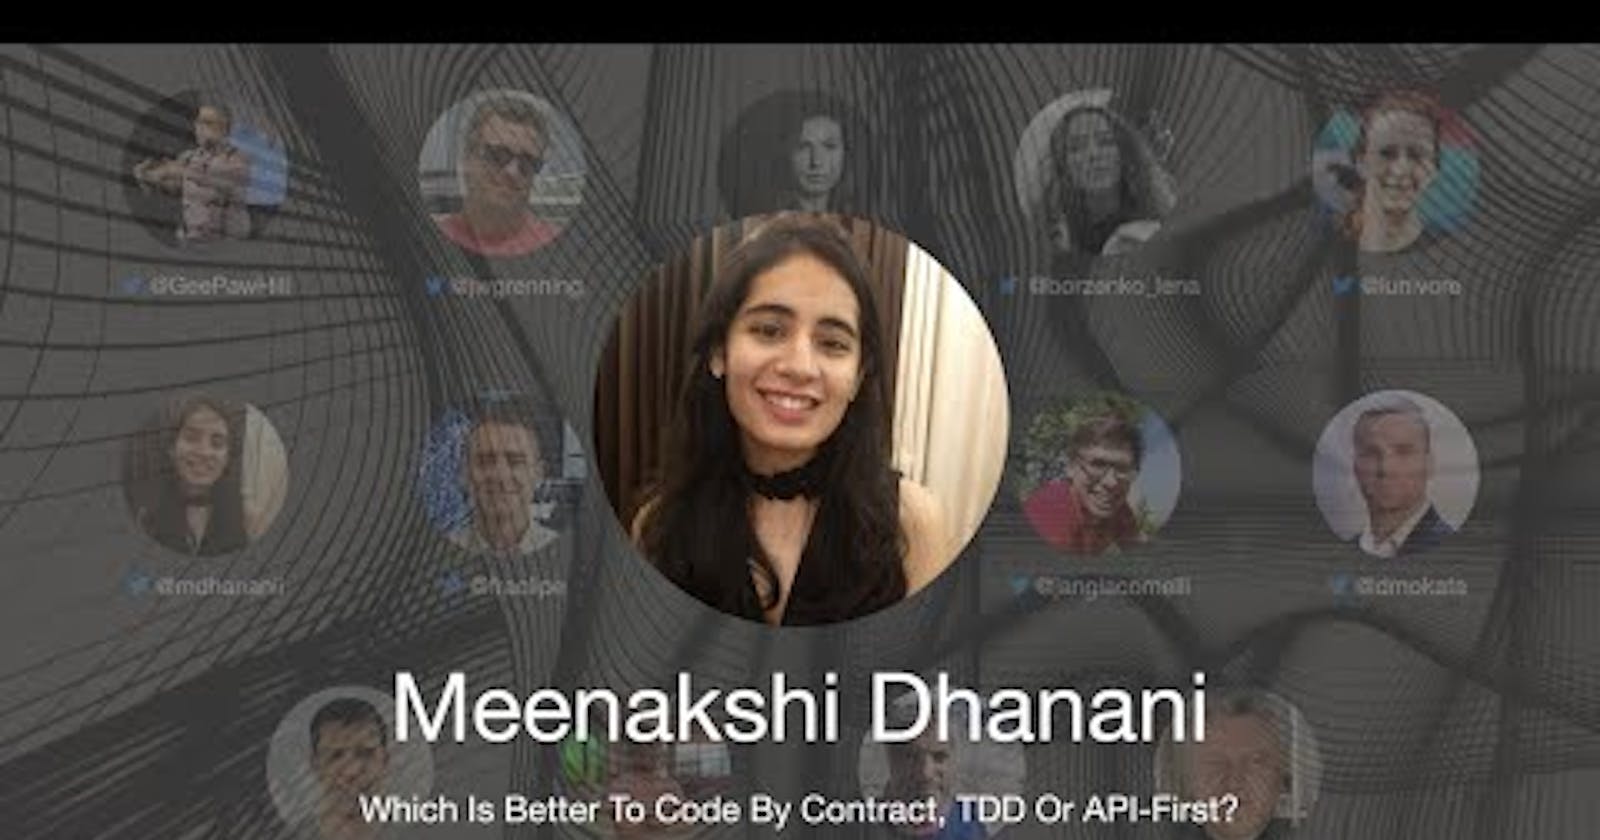 TDD Conference 2021 - Which is better to Code by Contract: TDD or API-first? - Meenakshi Dhanani